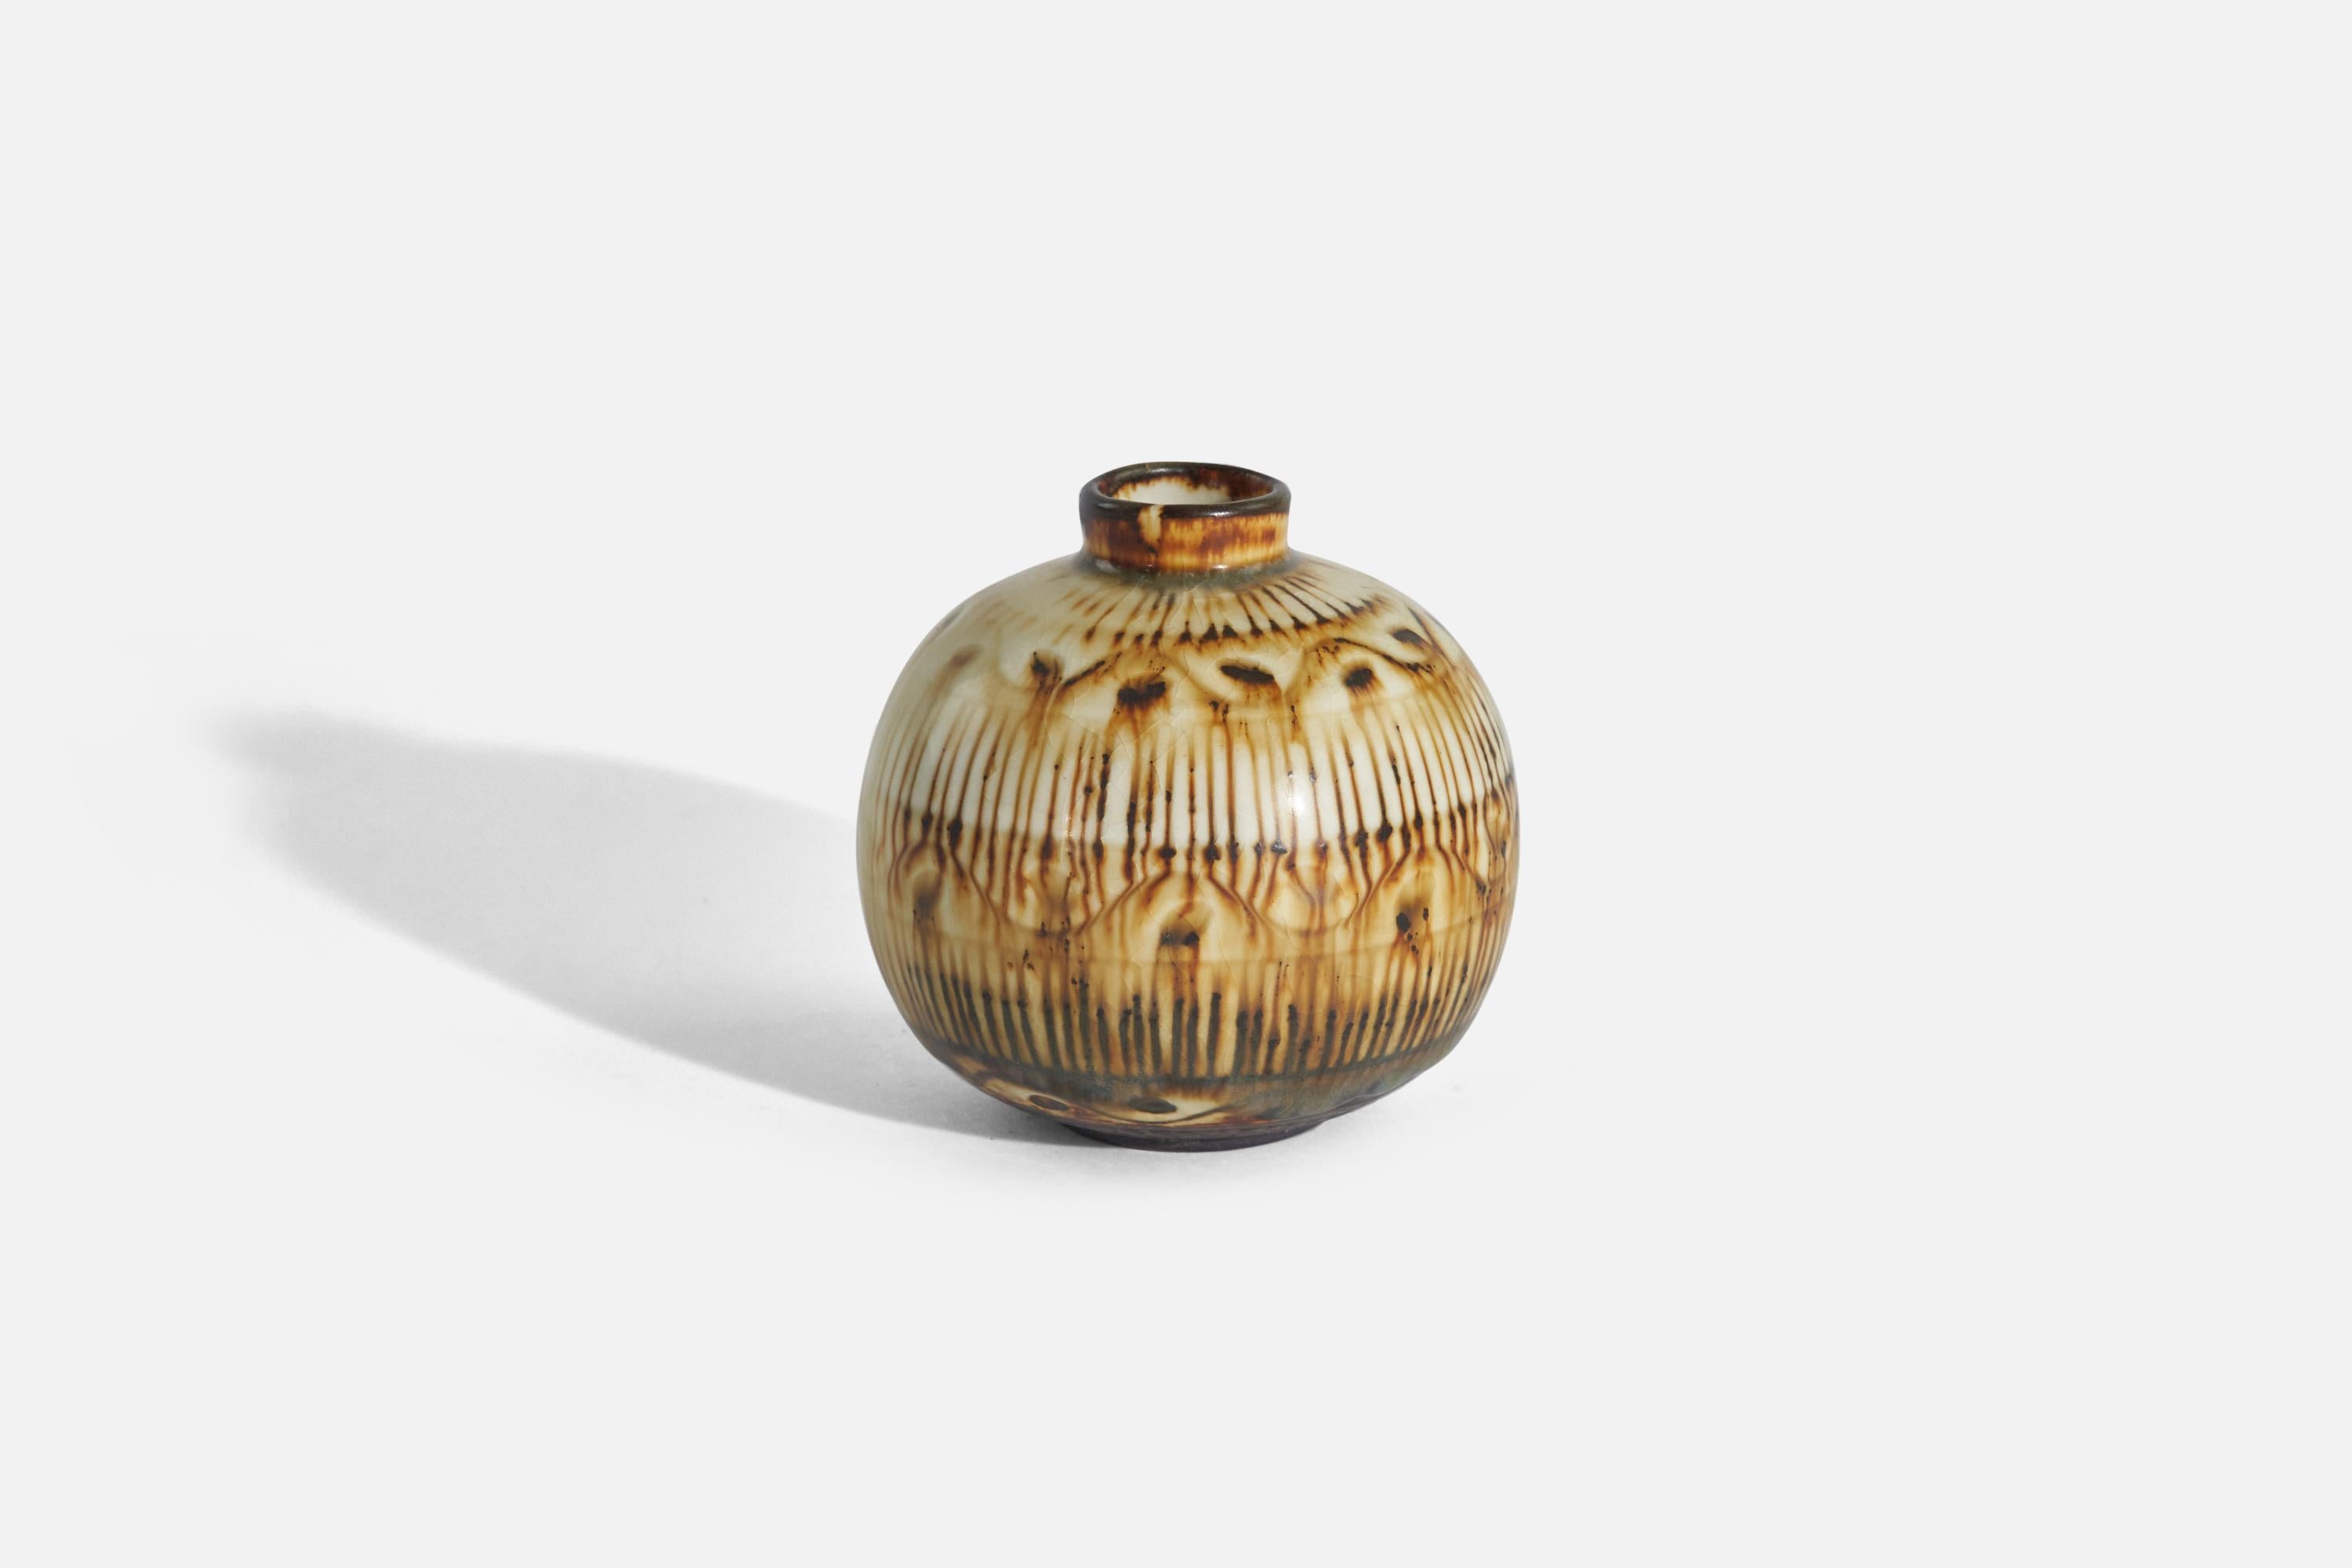 A brown and white-glazed stoneware vase designed by Getrud Lönegren and produced by Rörstrand, Sweden, 1936-1941. 